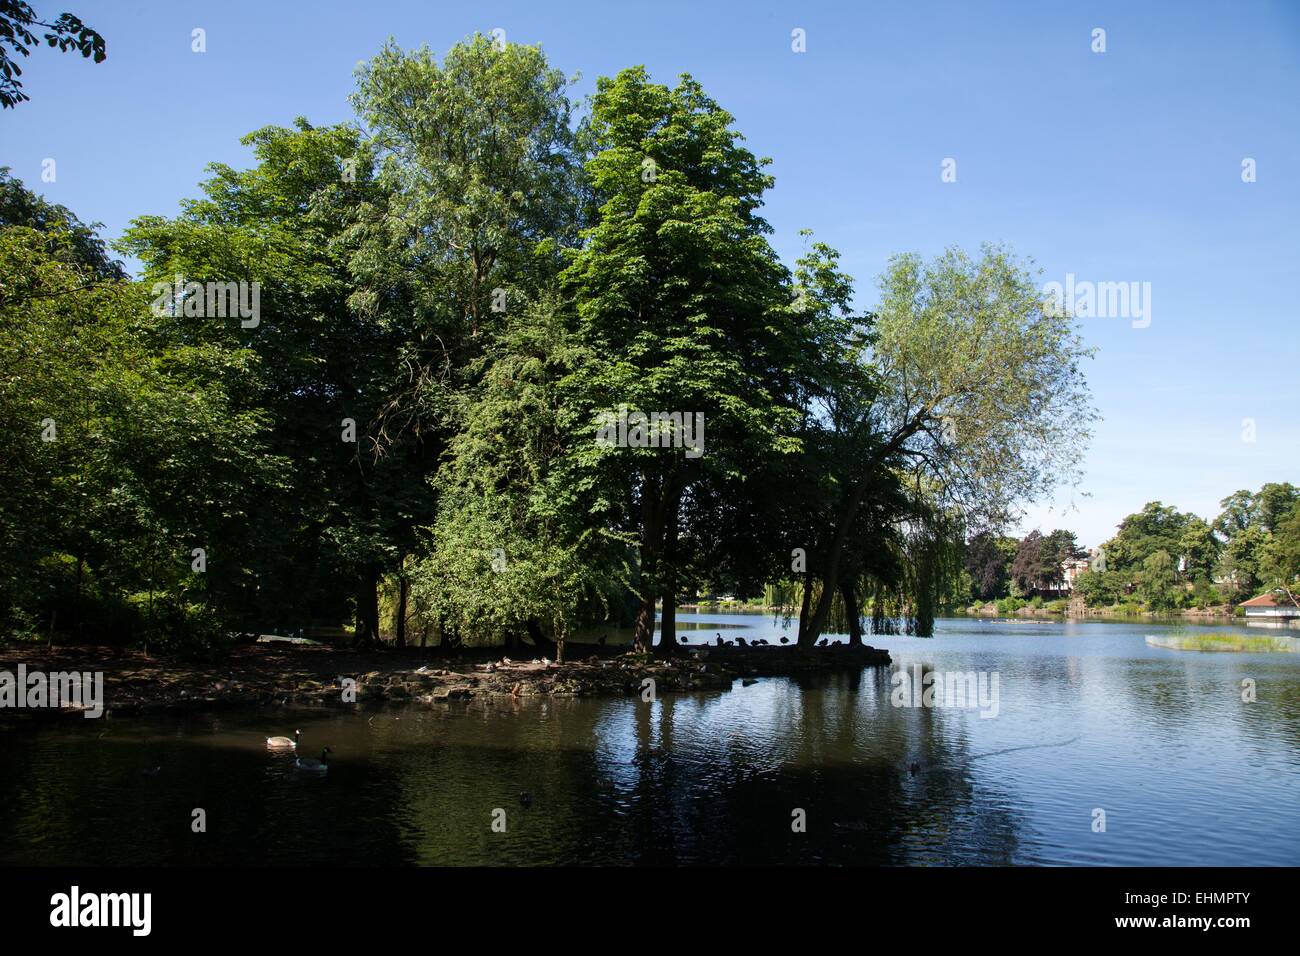 Il lago in Walsall Arboretum, West Midlands Foto Stock